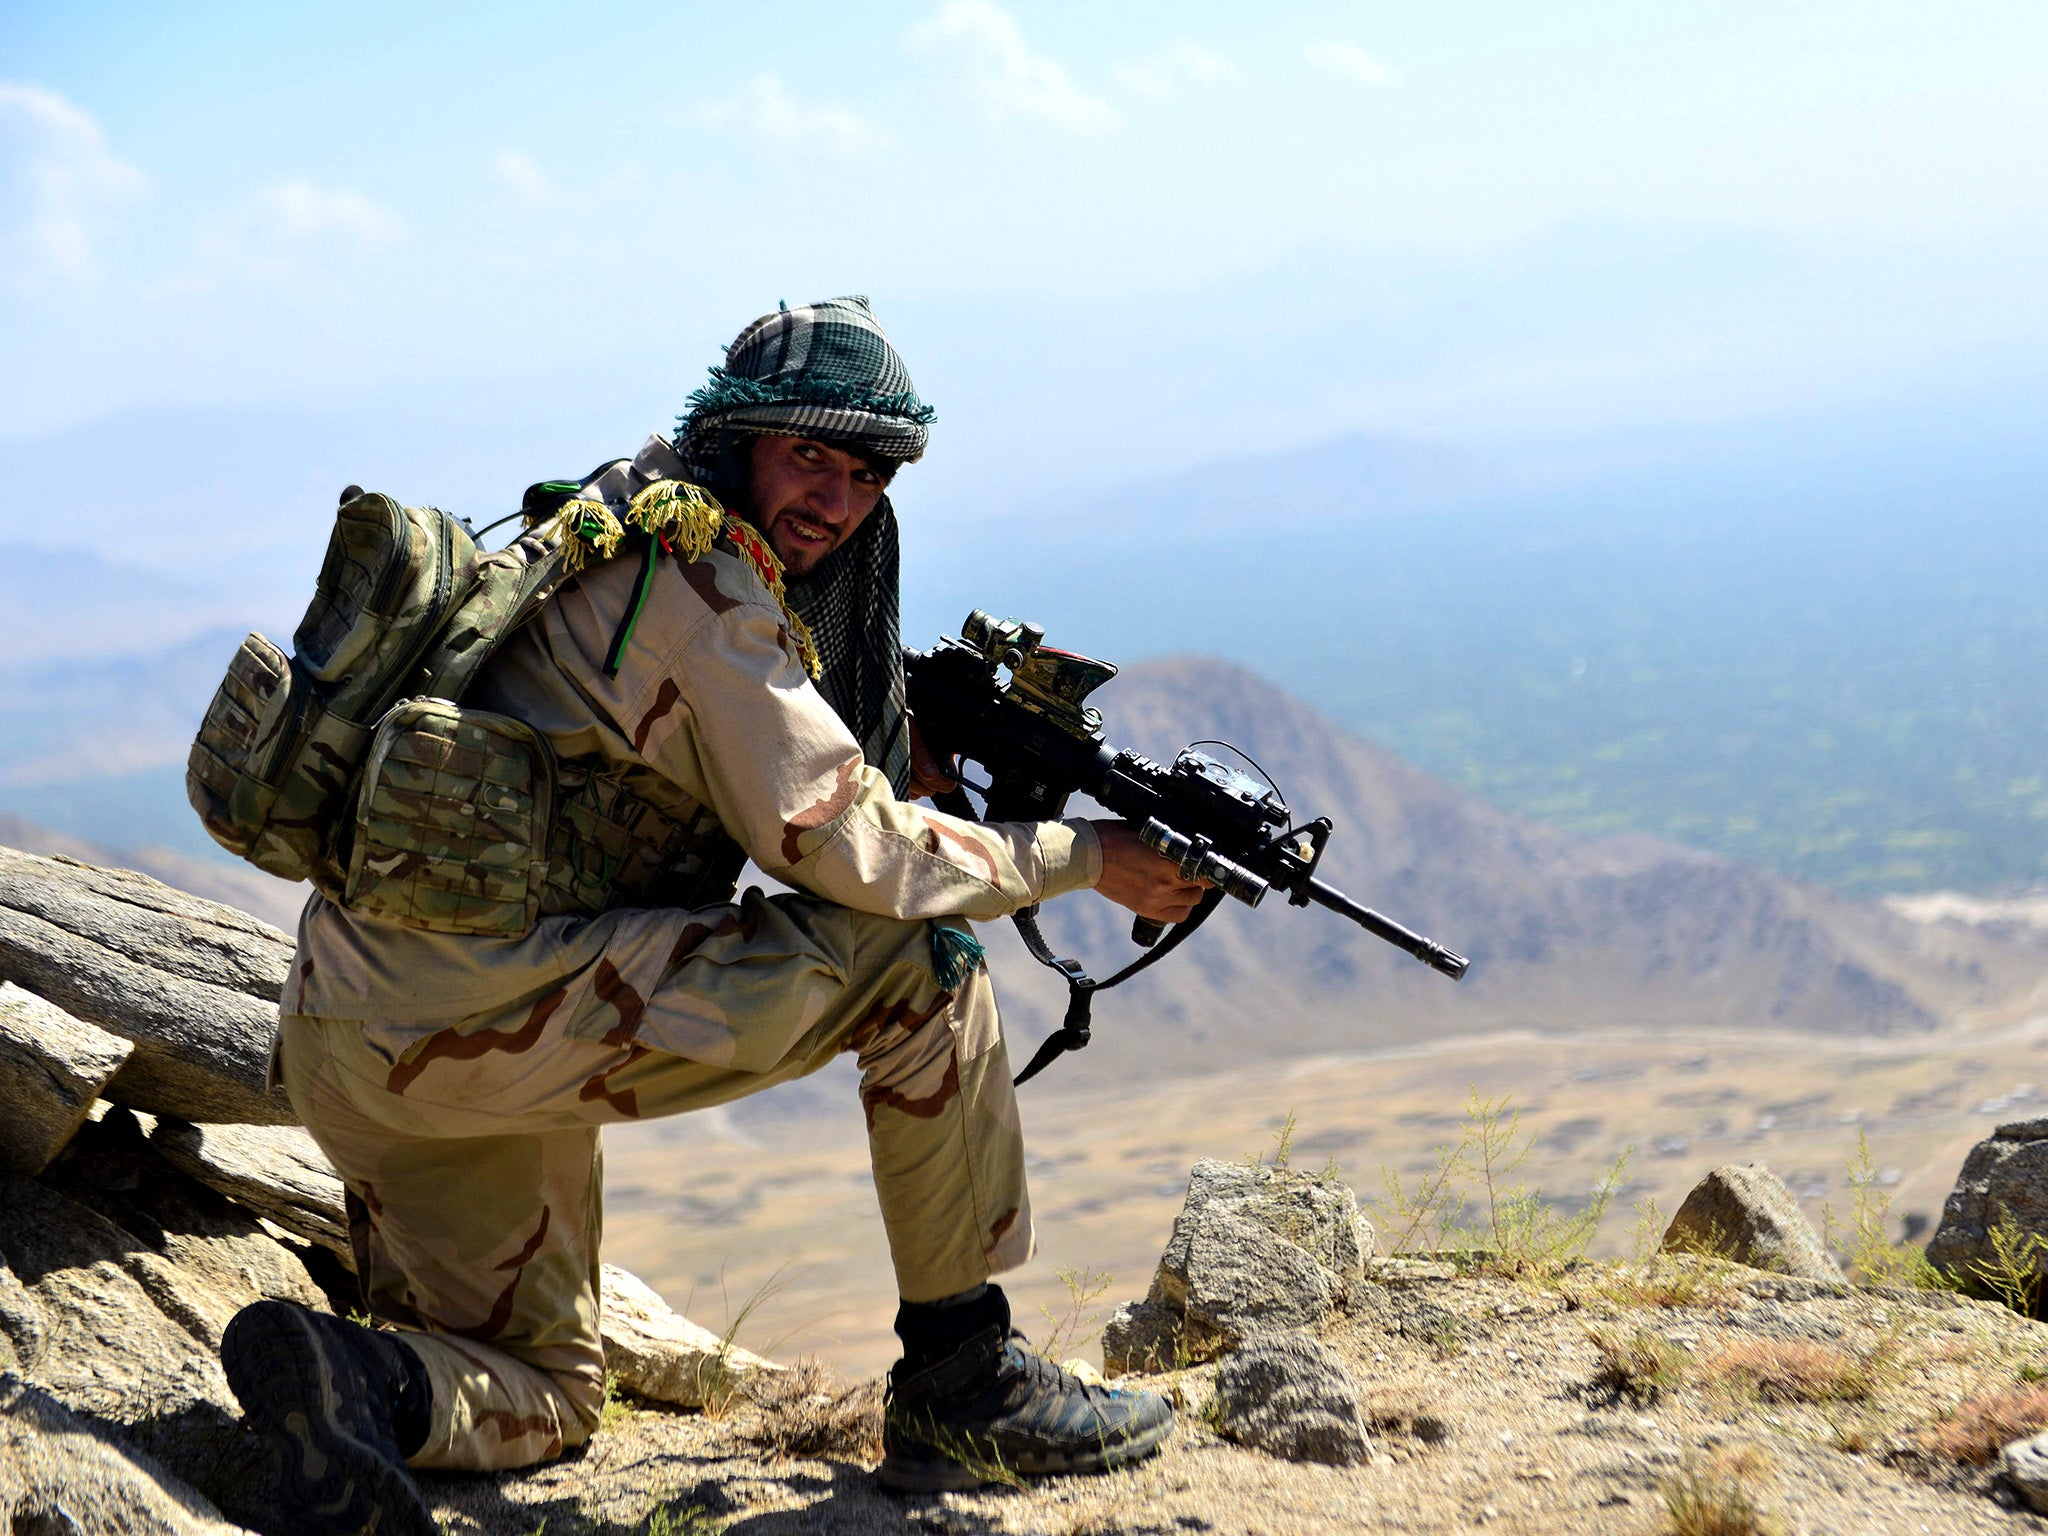 An Afghan resistance fighter takes position in the Panjshir Valley earlier this week